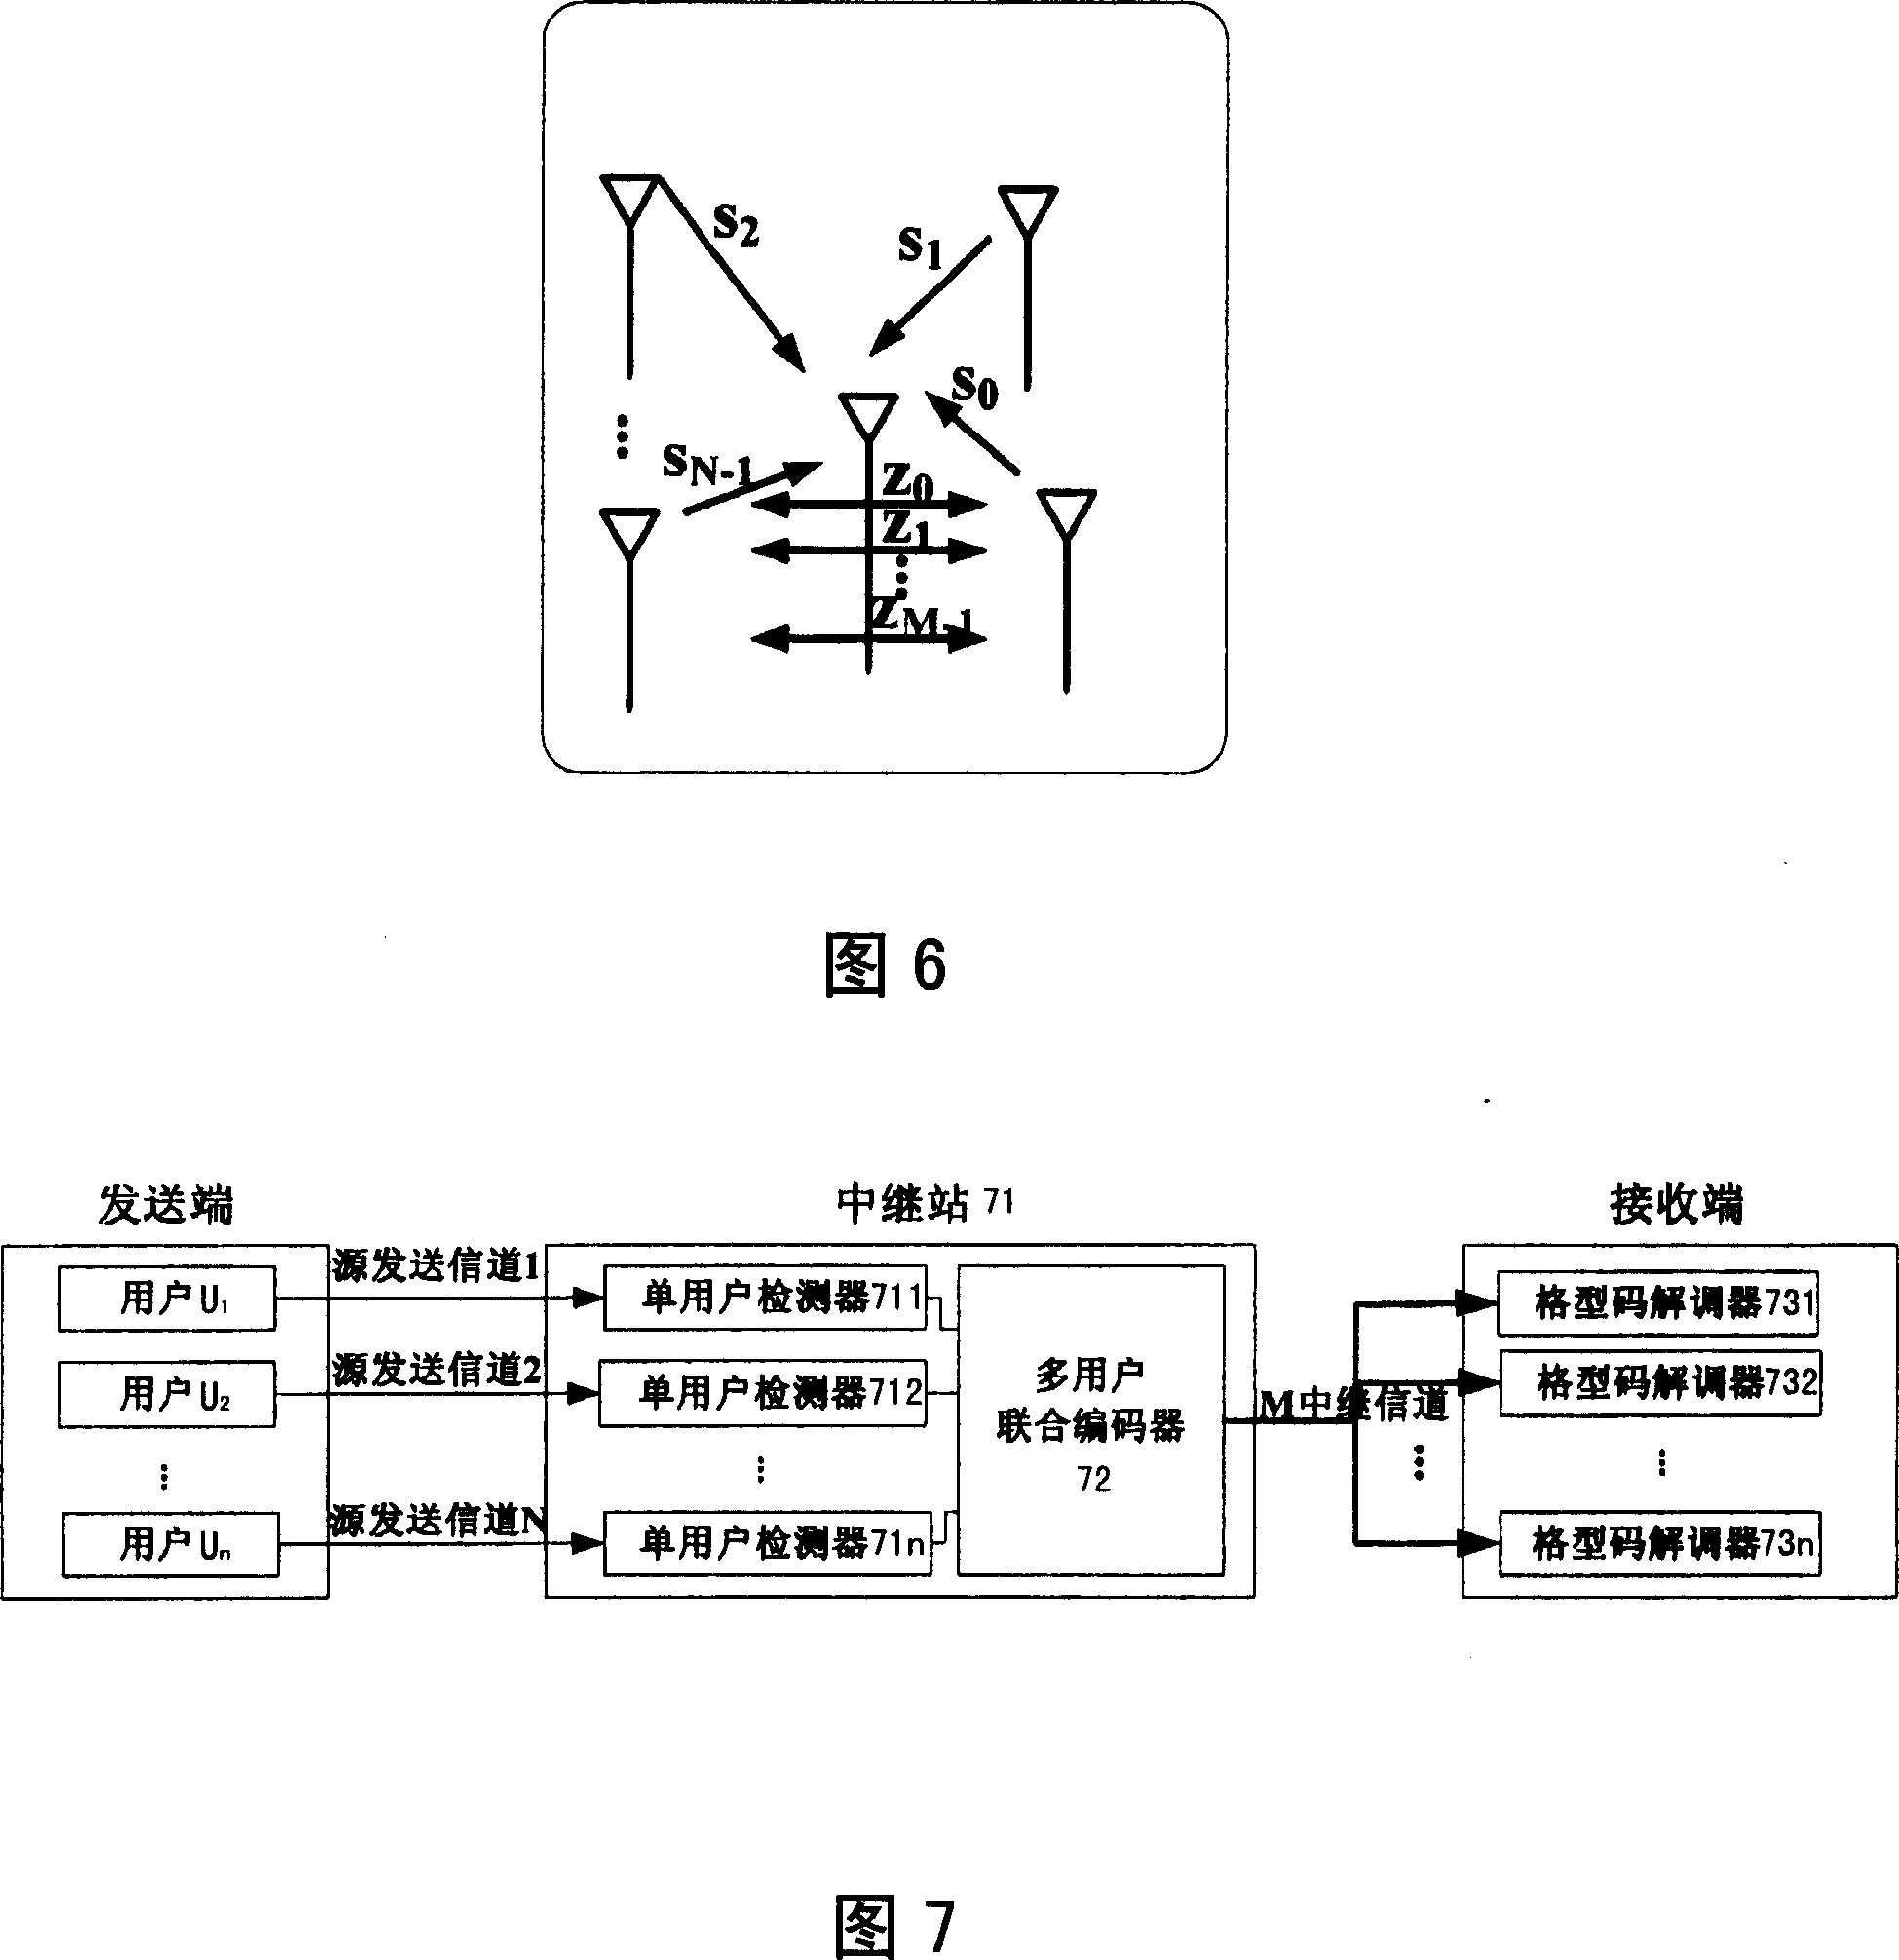 Multiuser transmission diversity and relay method and system